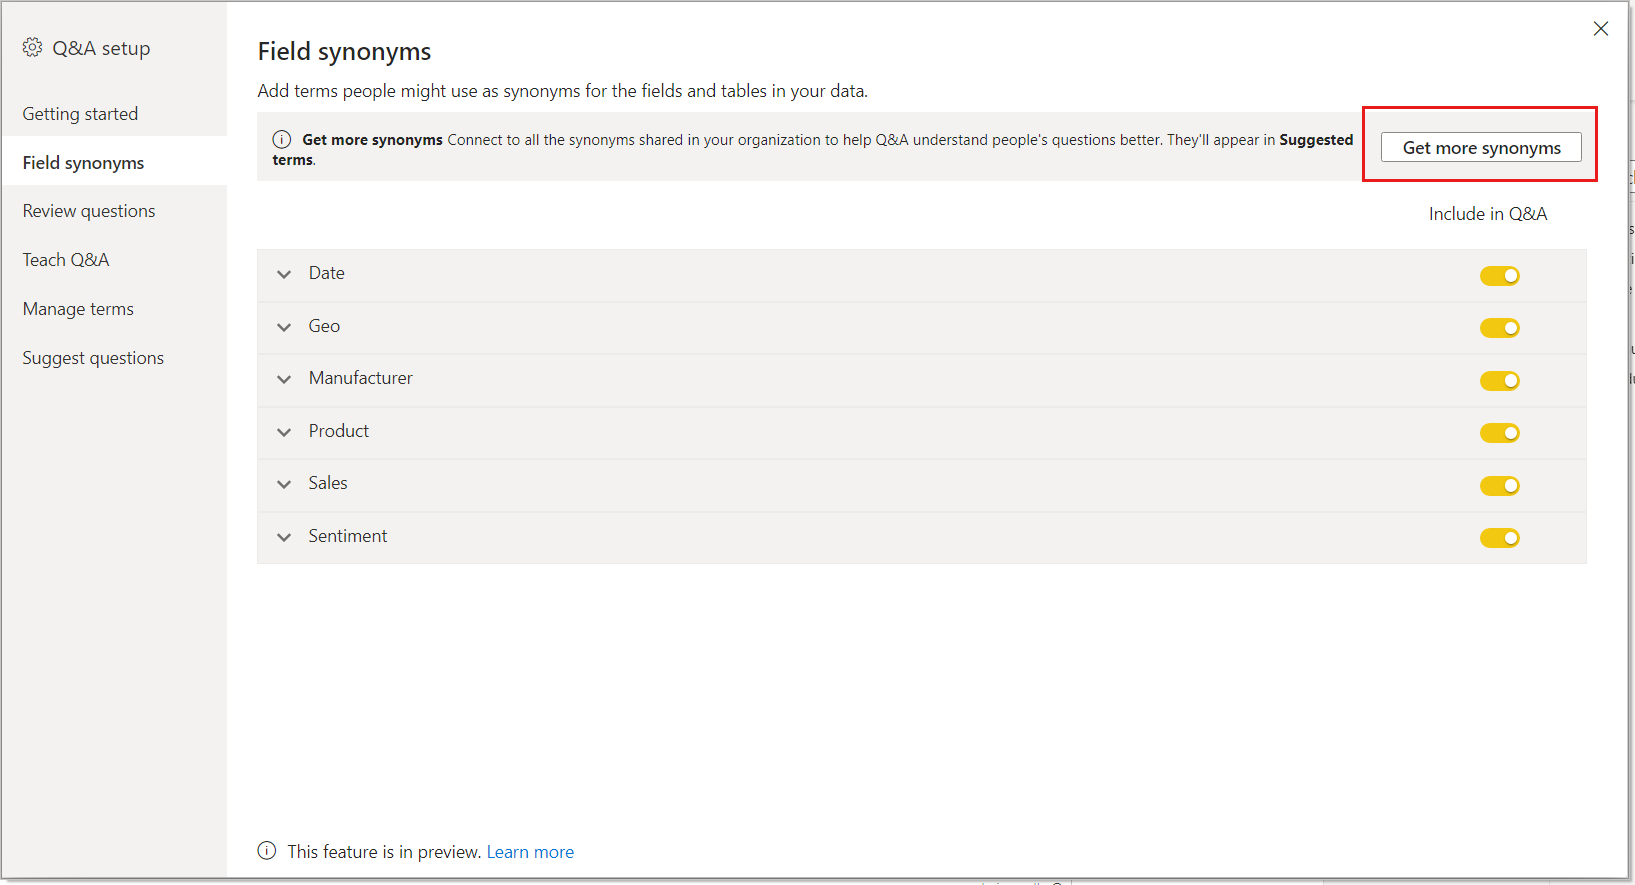 Screenshot of the Field synonyms page with the Get more synonyms button highlighted.